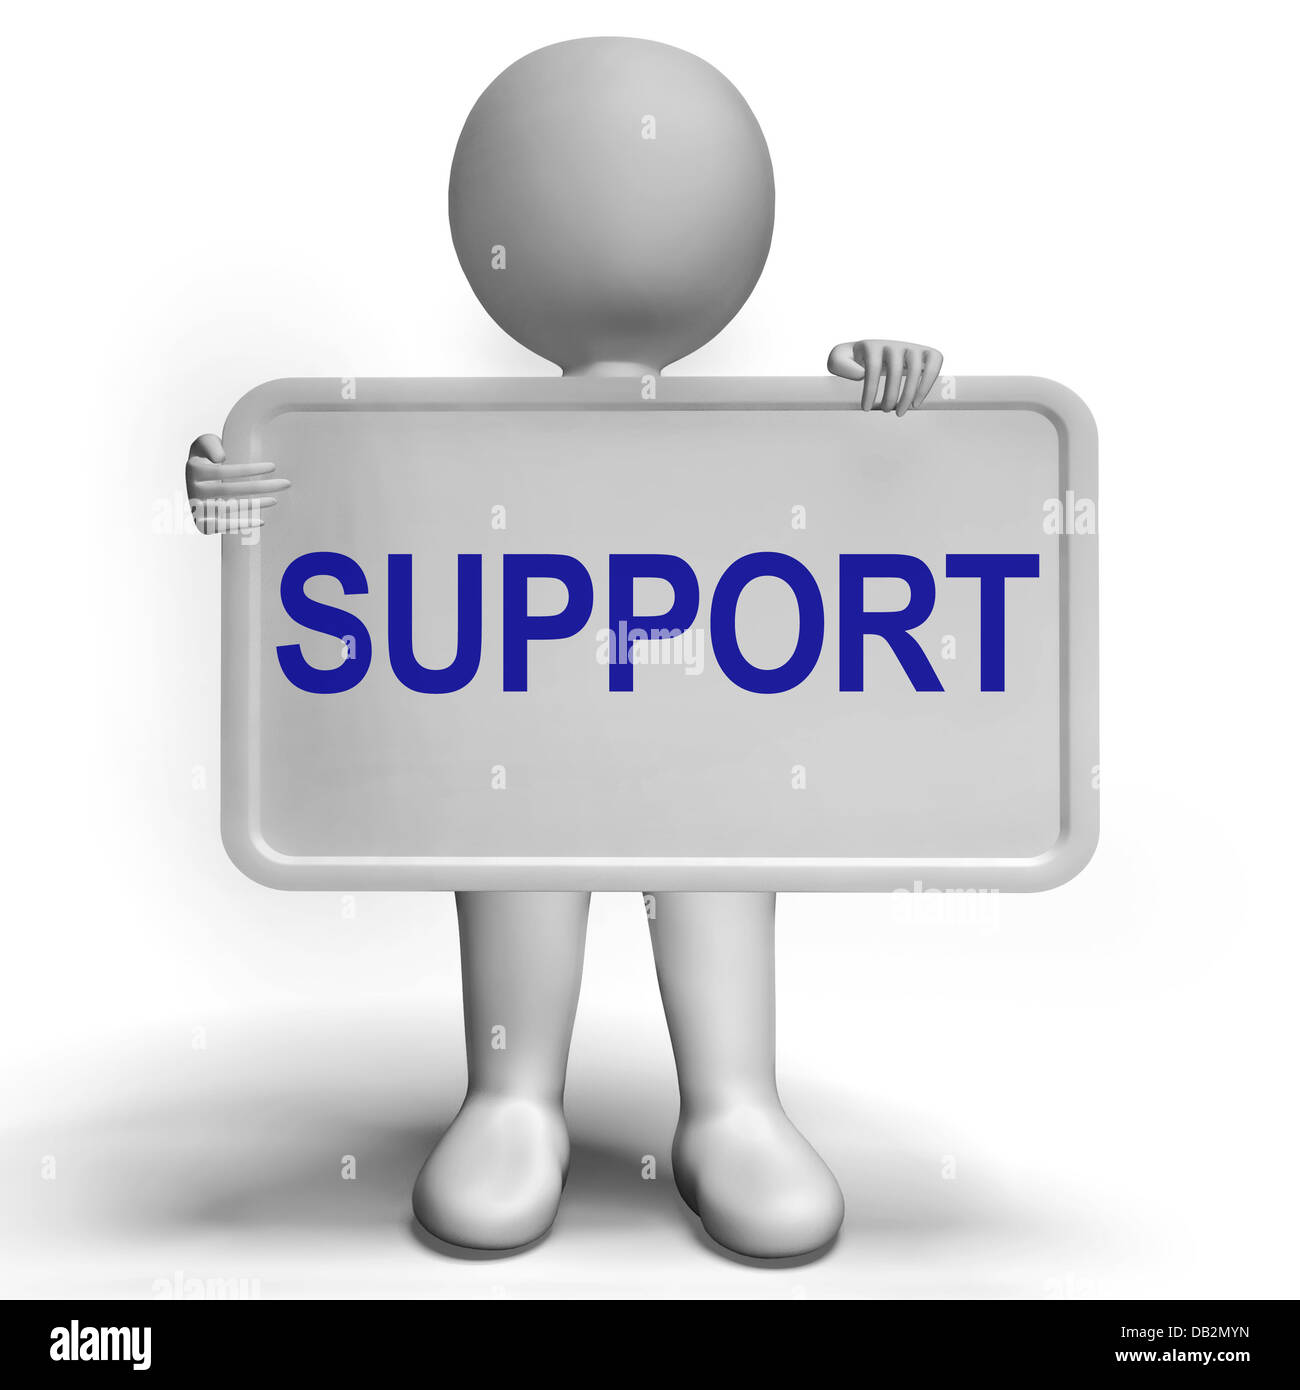 Support On Sign Showing Customer Help And Advice Stock Photo